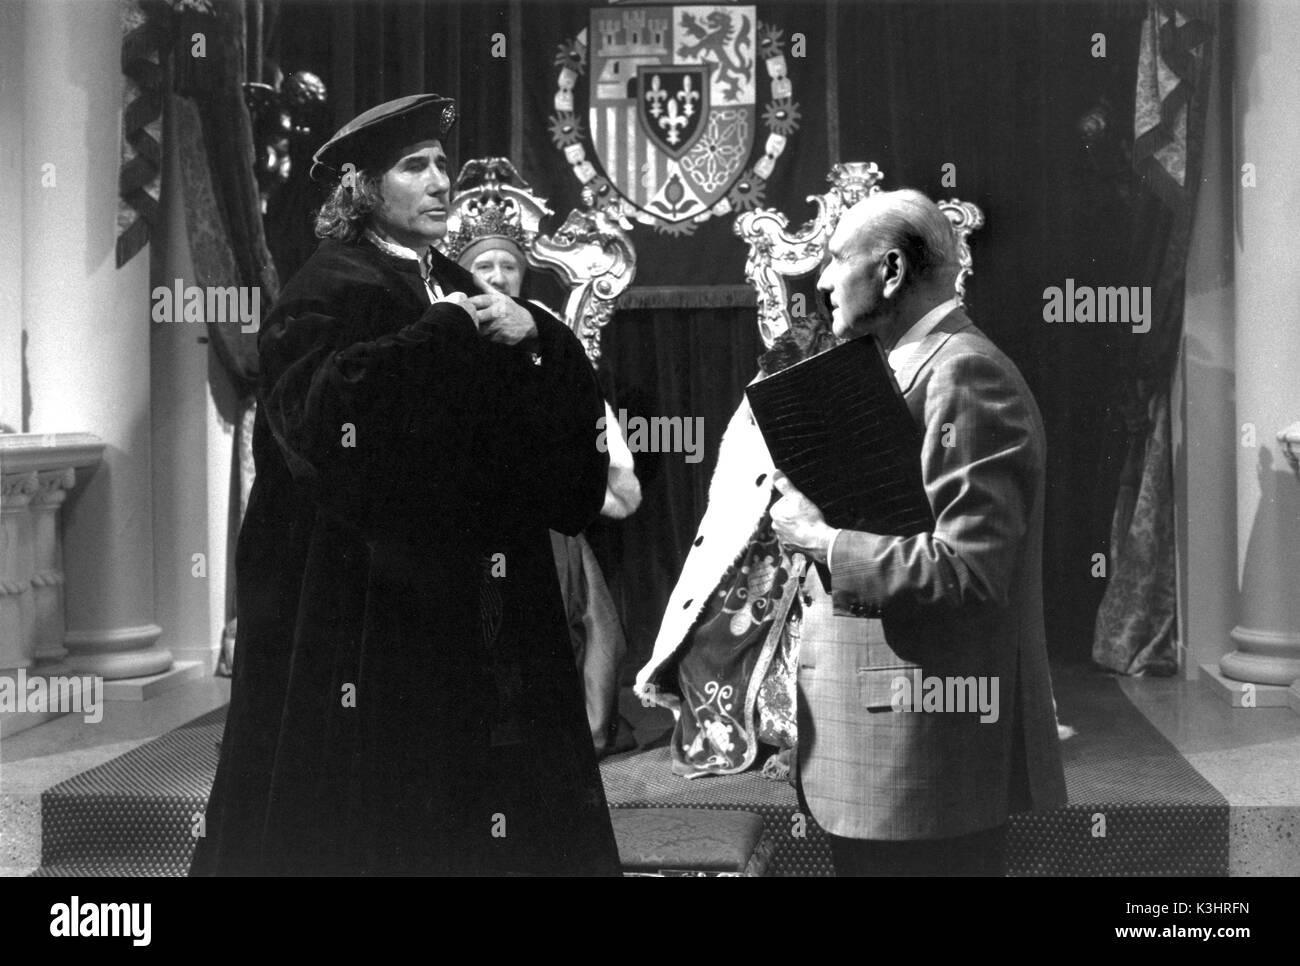 CARRY ON COLUMBUS from left - JIM DALE as Christopher Columbus, LESLIE PHILLIPS as King Ferdinand, GERALD THOMAS - Director CARRY ON COLUMBUS Stock Photo